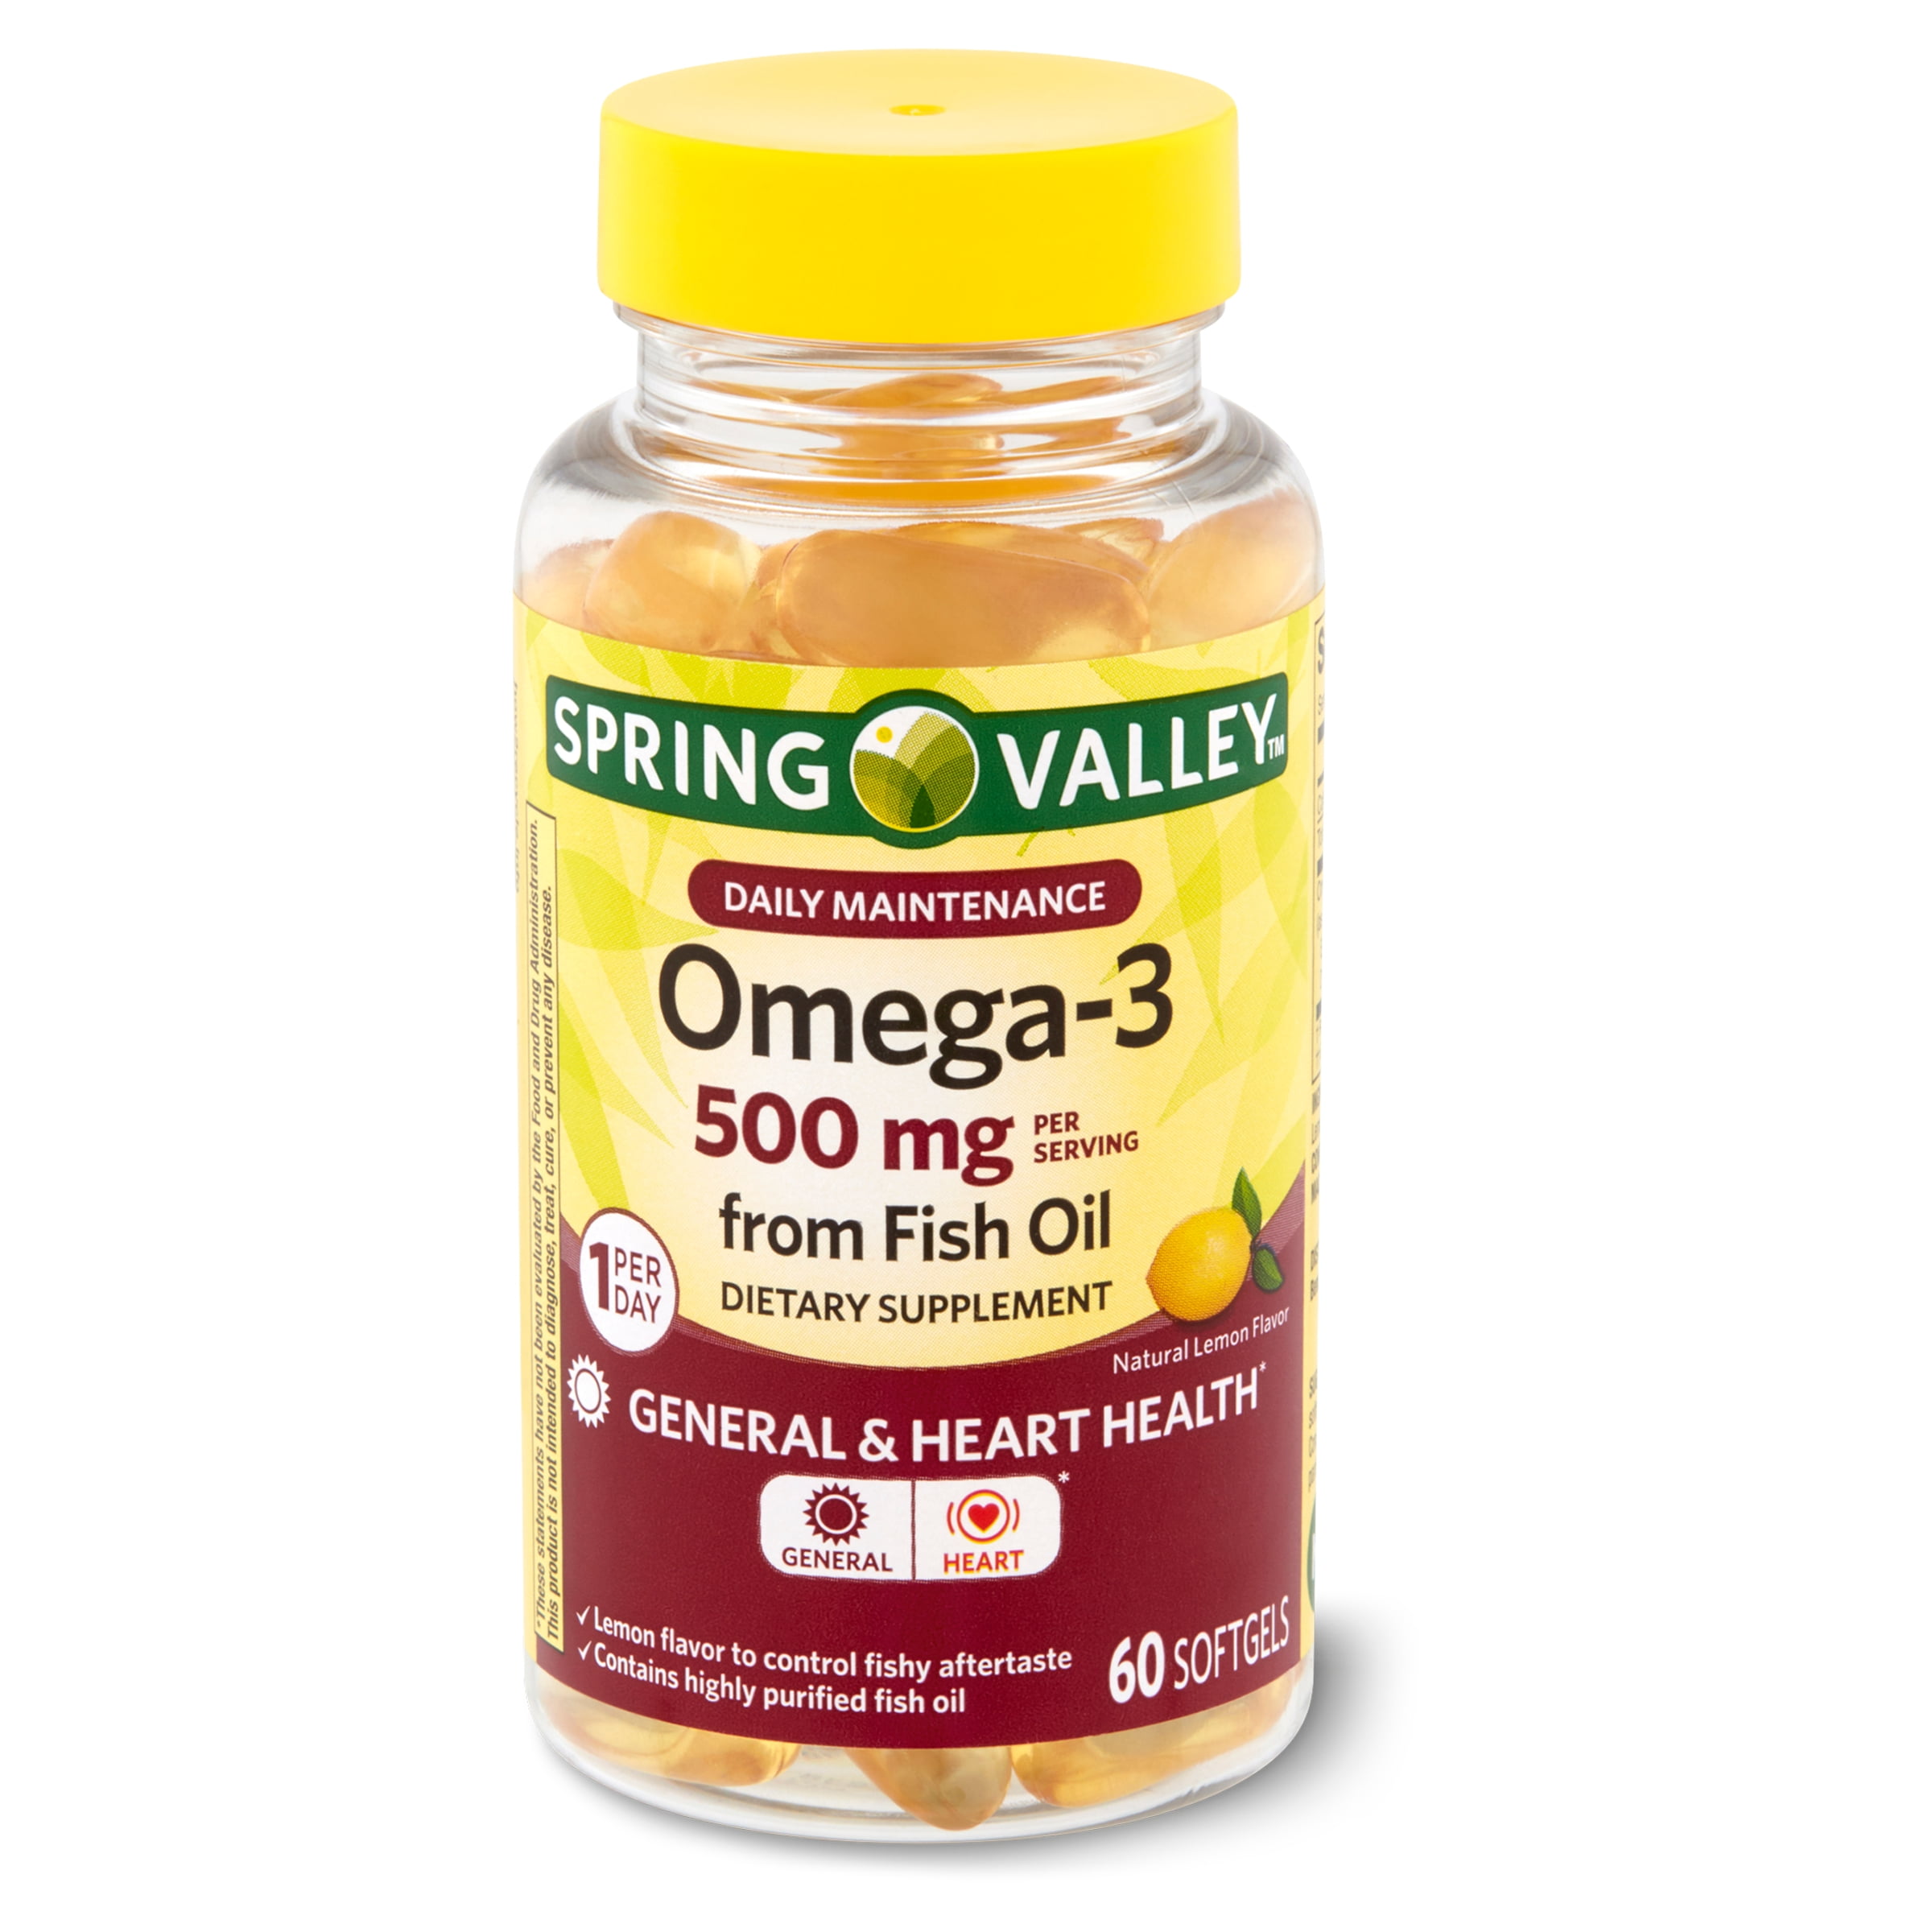 Spring Valley Omega-3 Fish Oil† Softgels, 500 mg, 60 Count